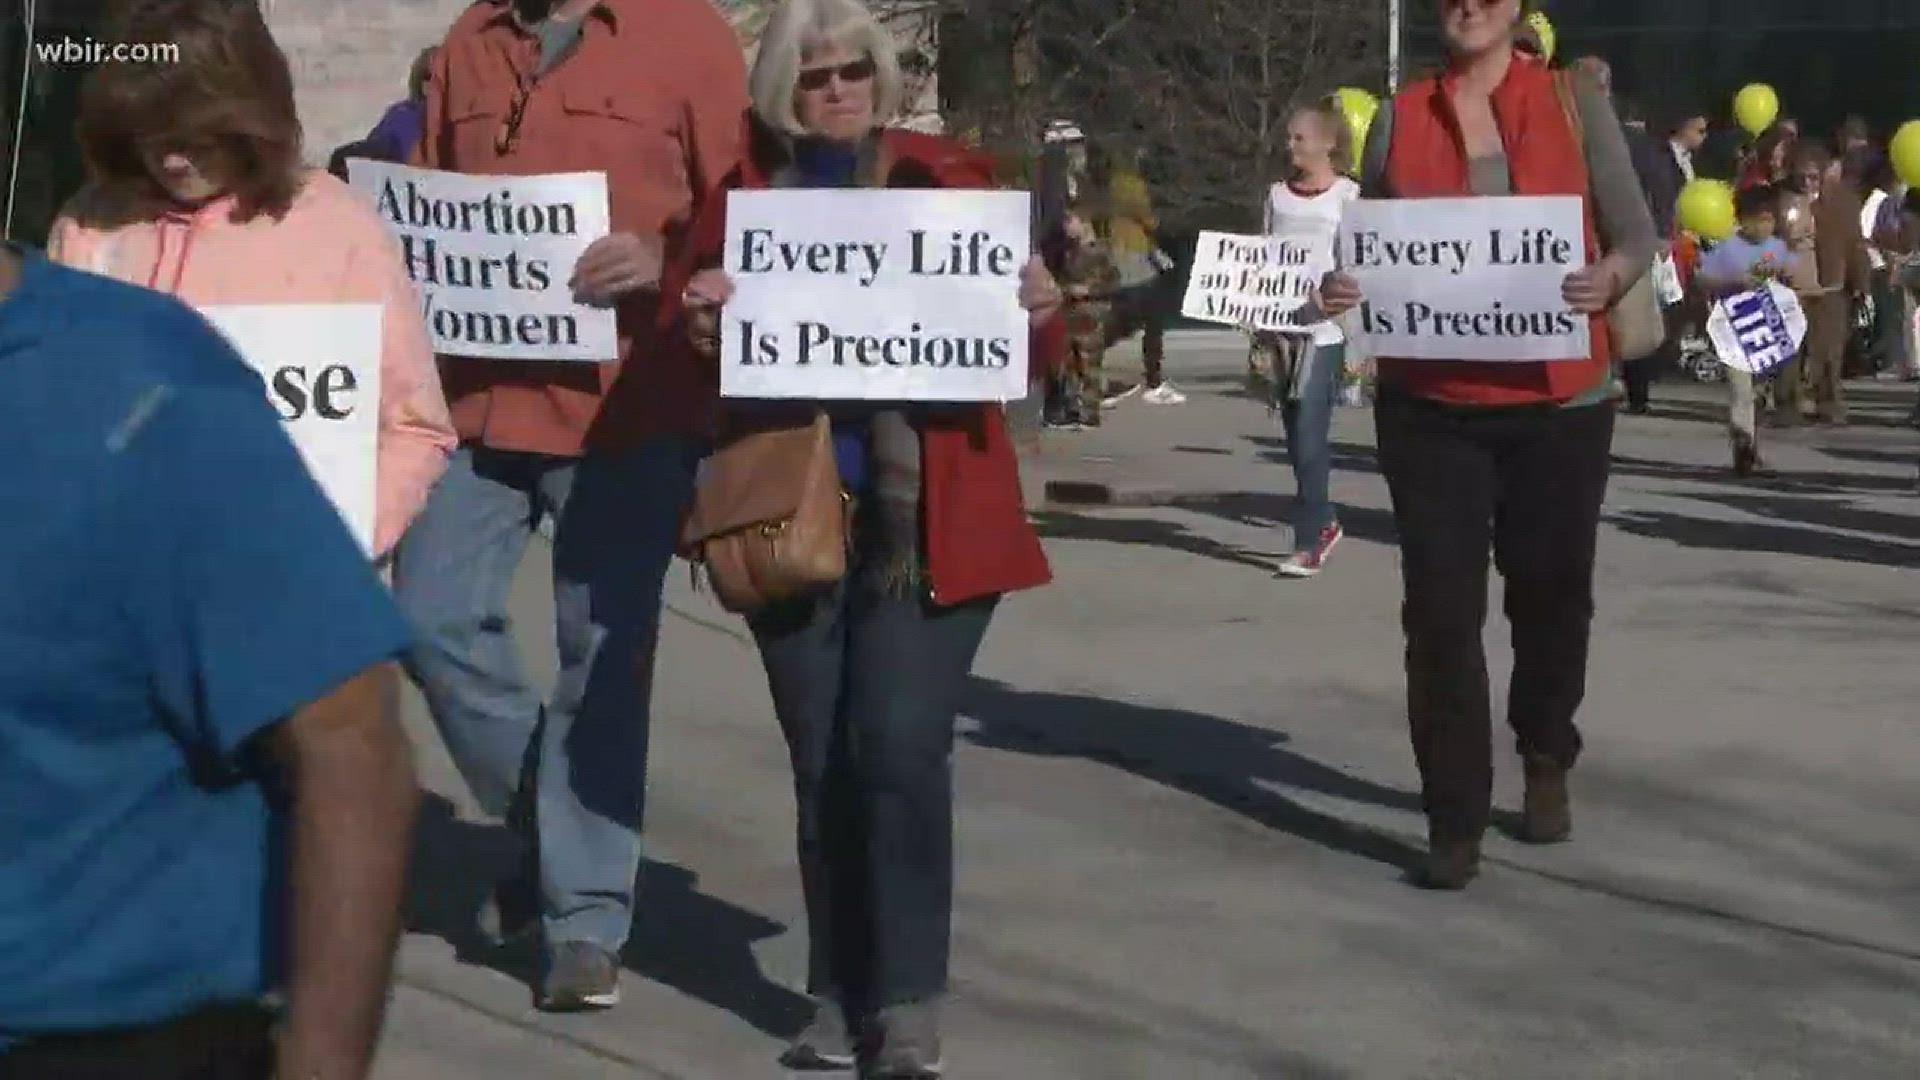 The Tennessee Right to Life - Knox County Chapter held its annual March for Life on Sunday at 2 p.m. at World's Fair Park.